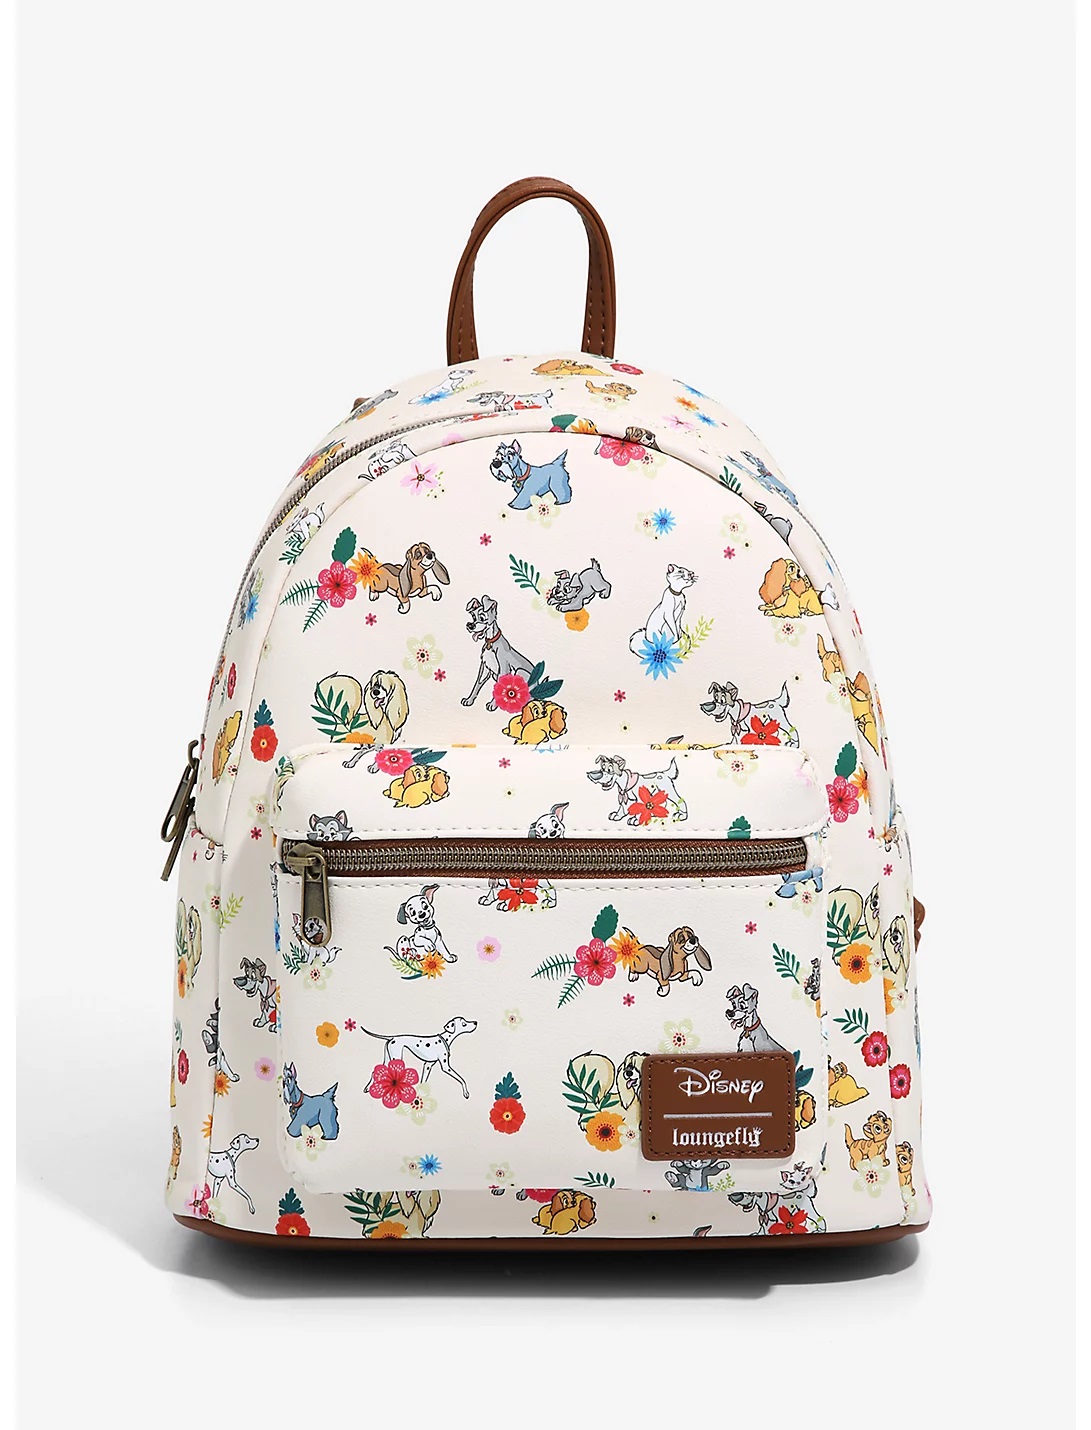 Loungefly backpack. Disney exclusive NEW